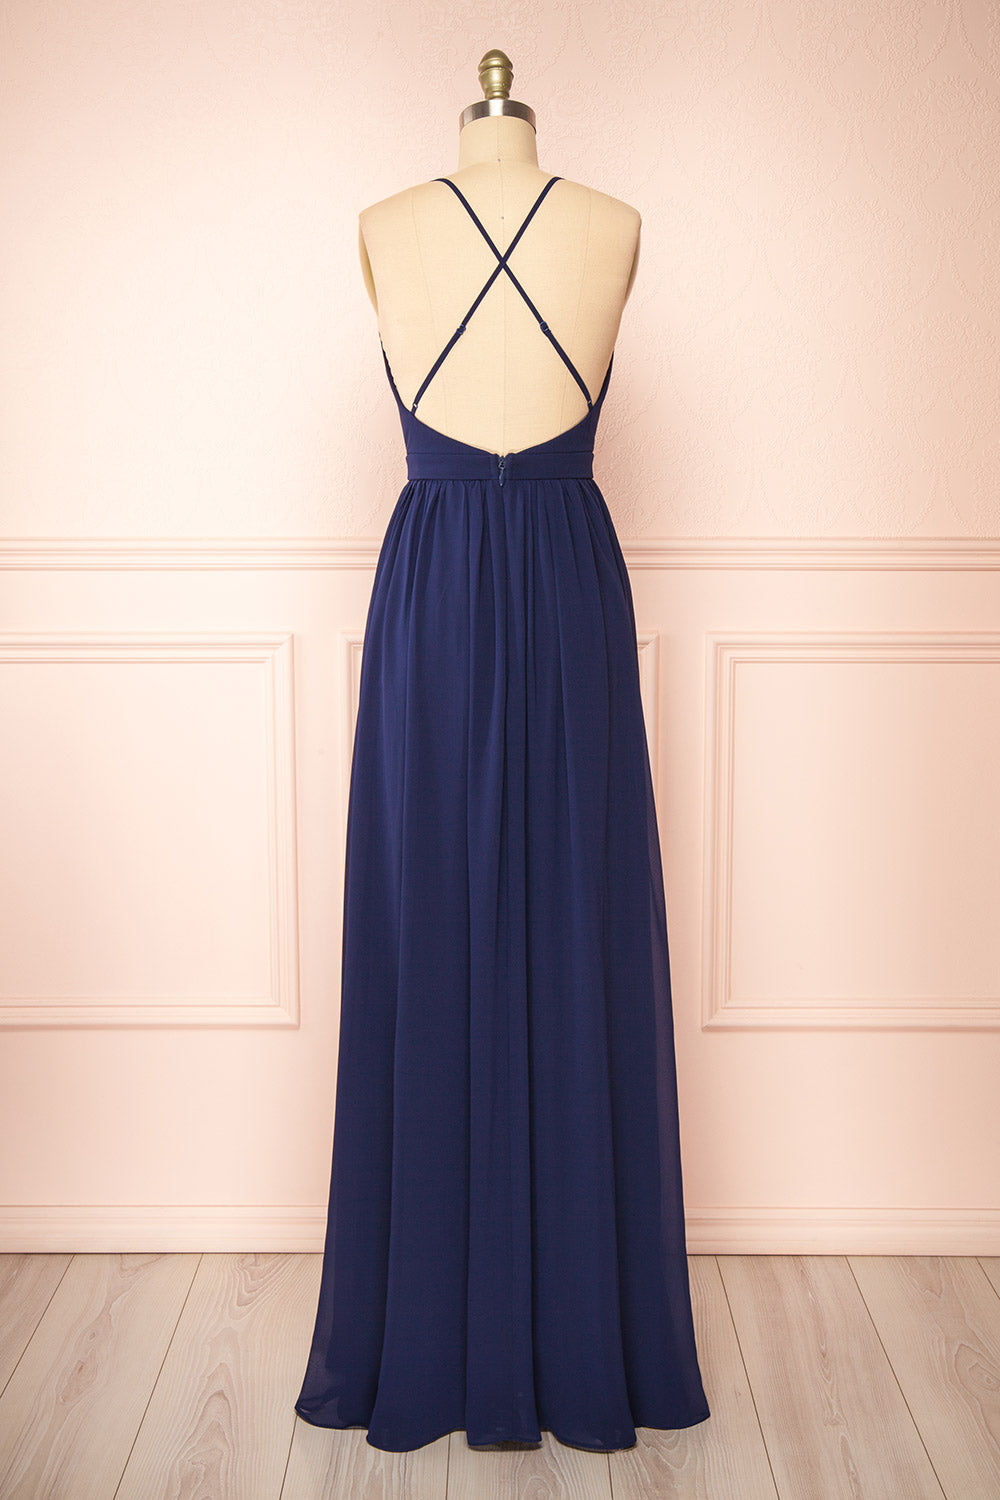 Haley Night Navy Gown with Plunging Neckline | Boutique 1861 back view